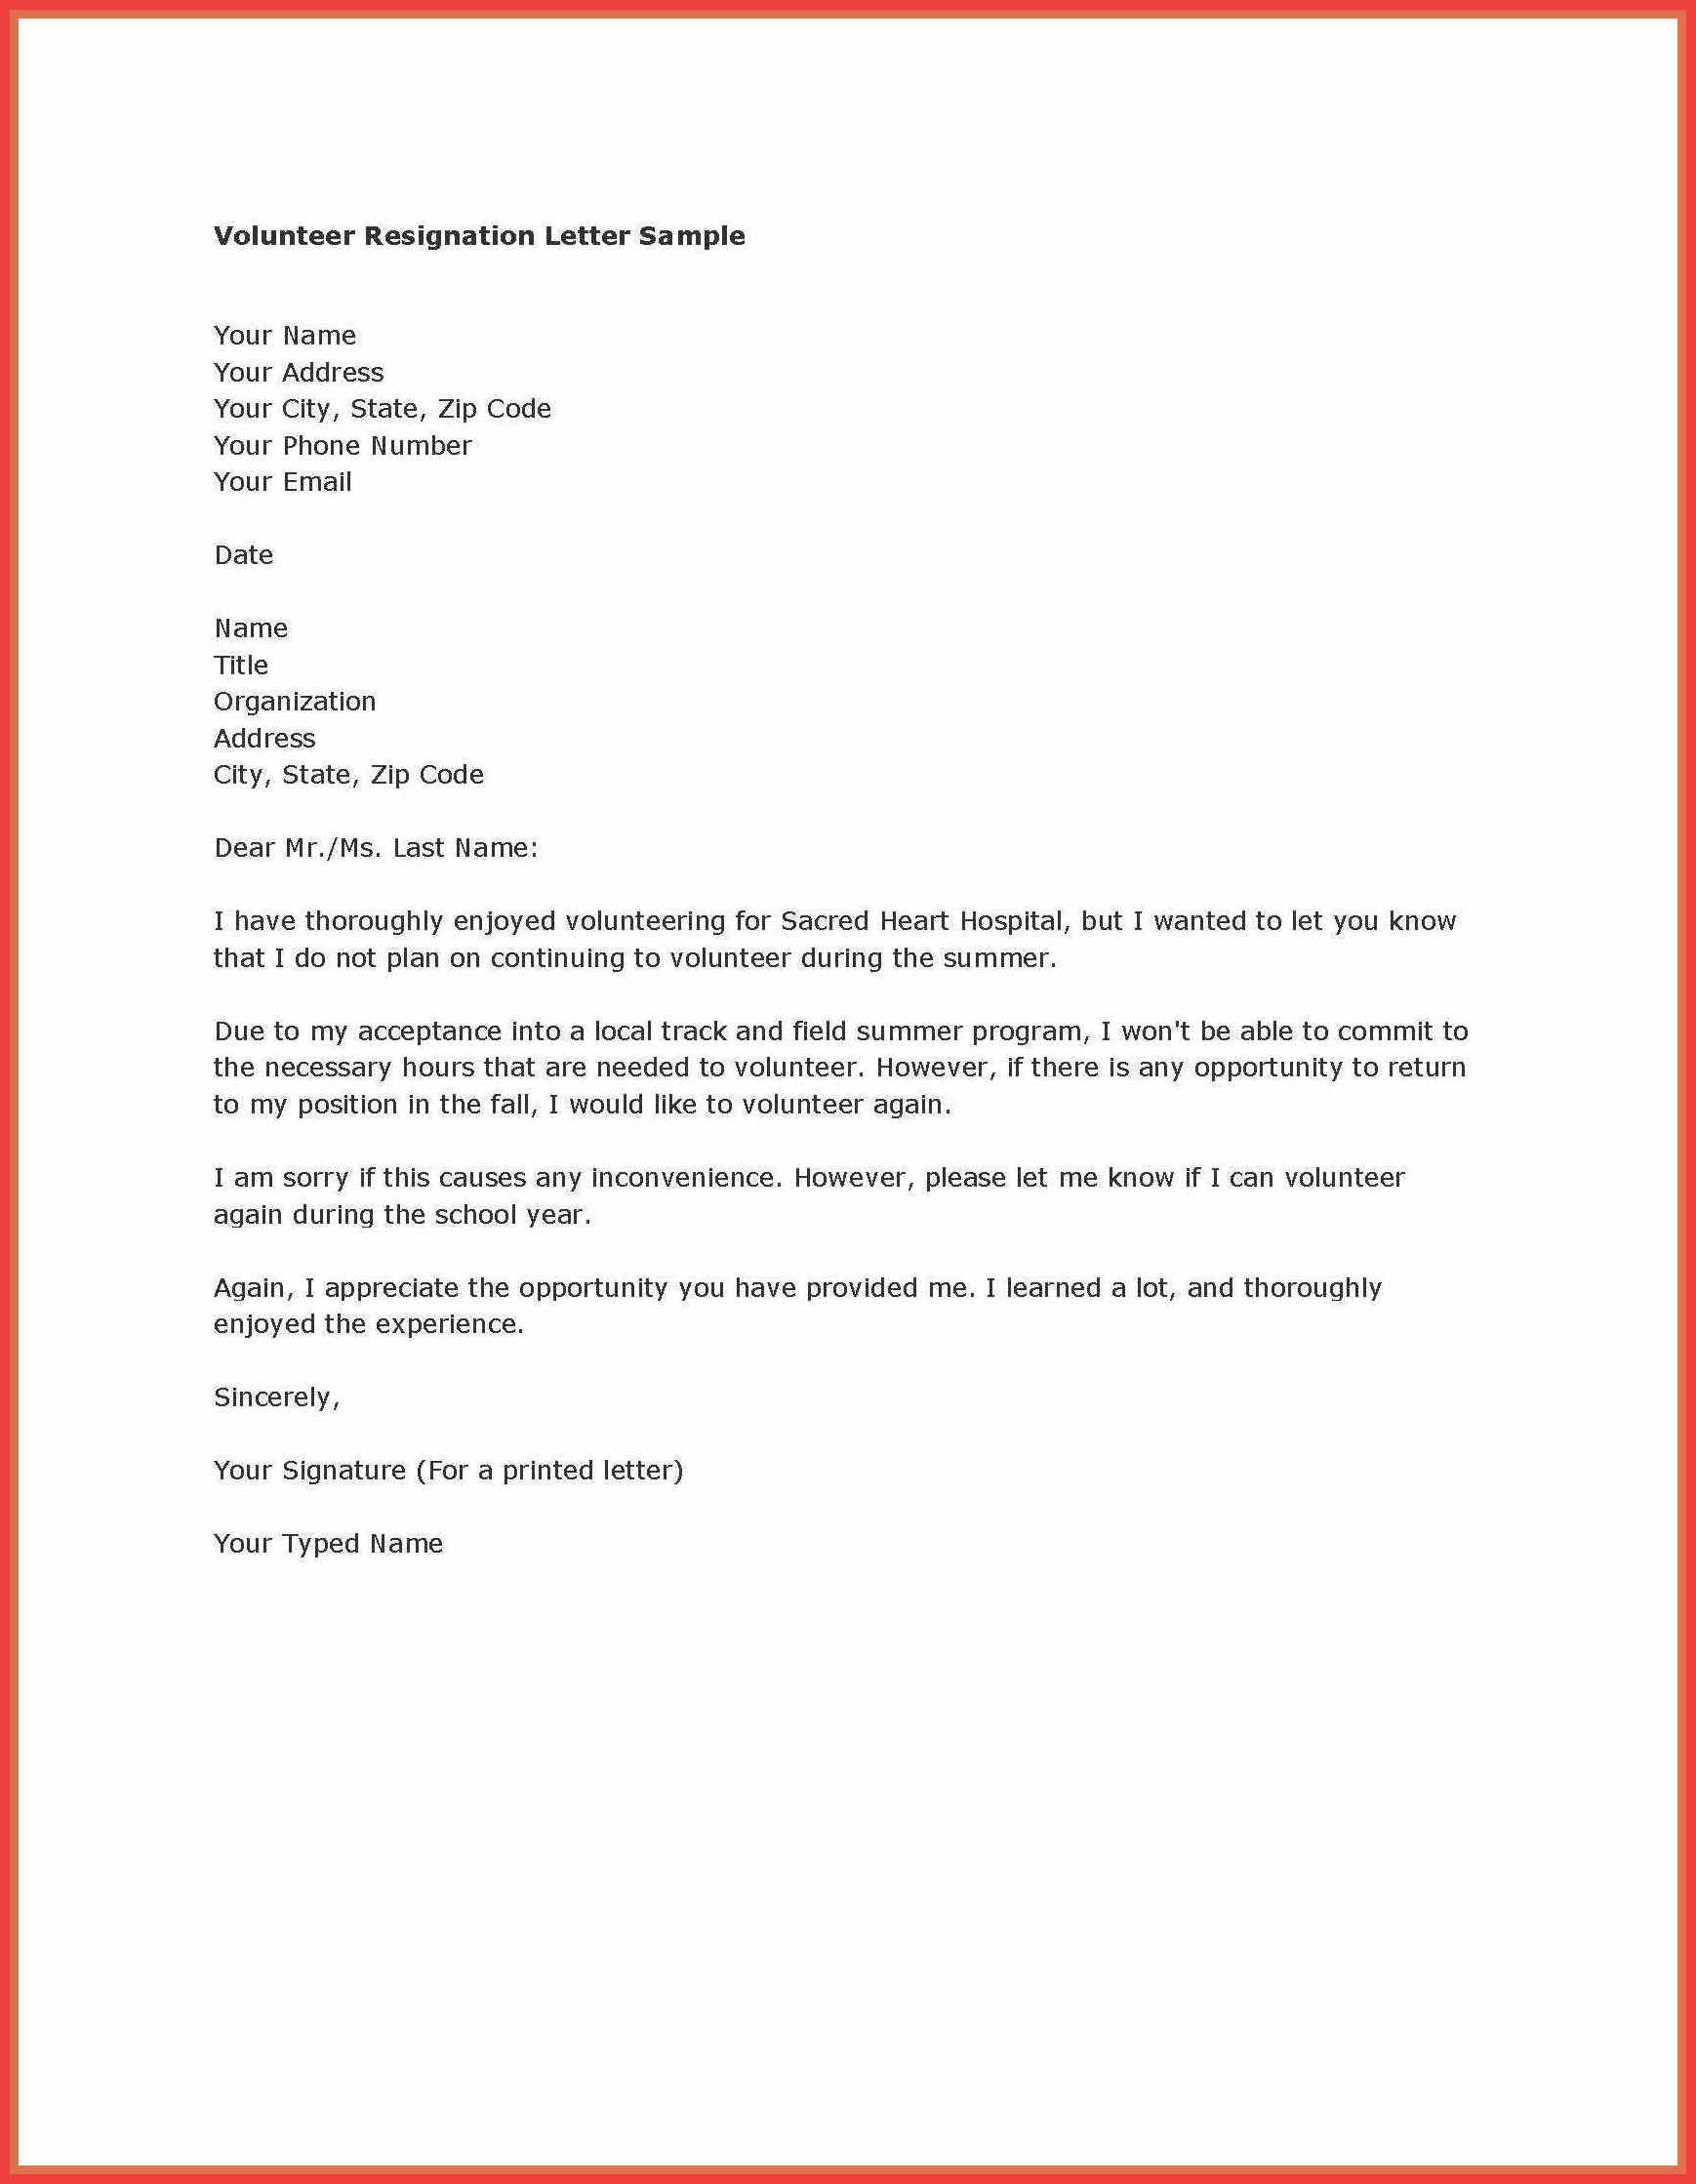 Letter of Resignation Template What Should You Write? - letterly.info